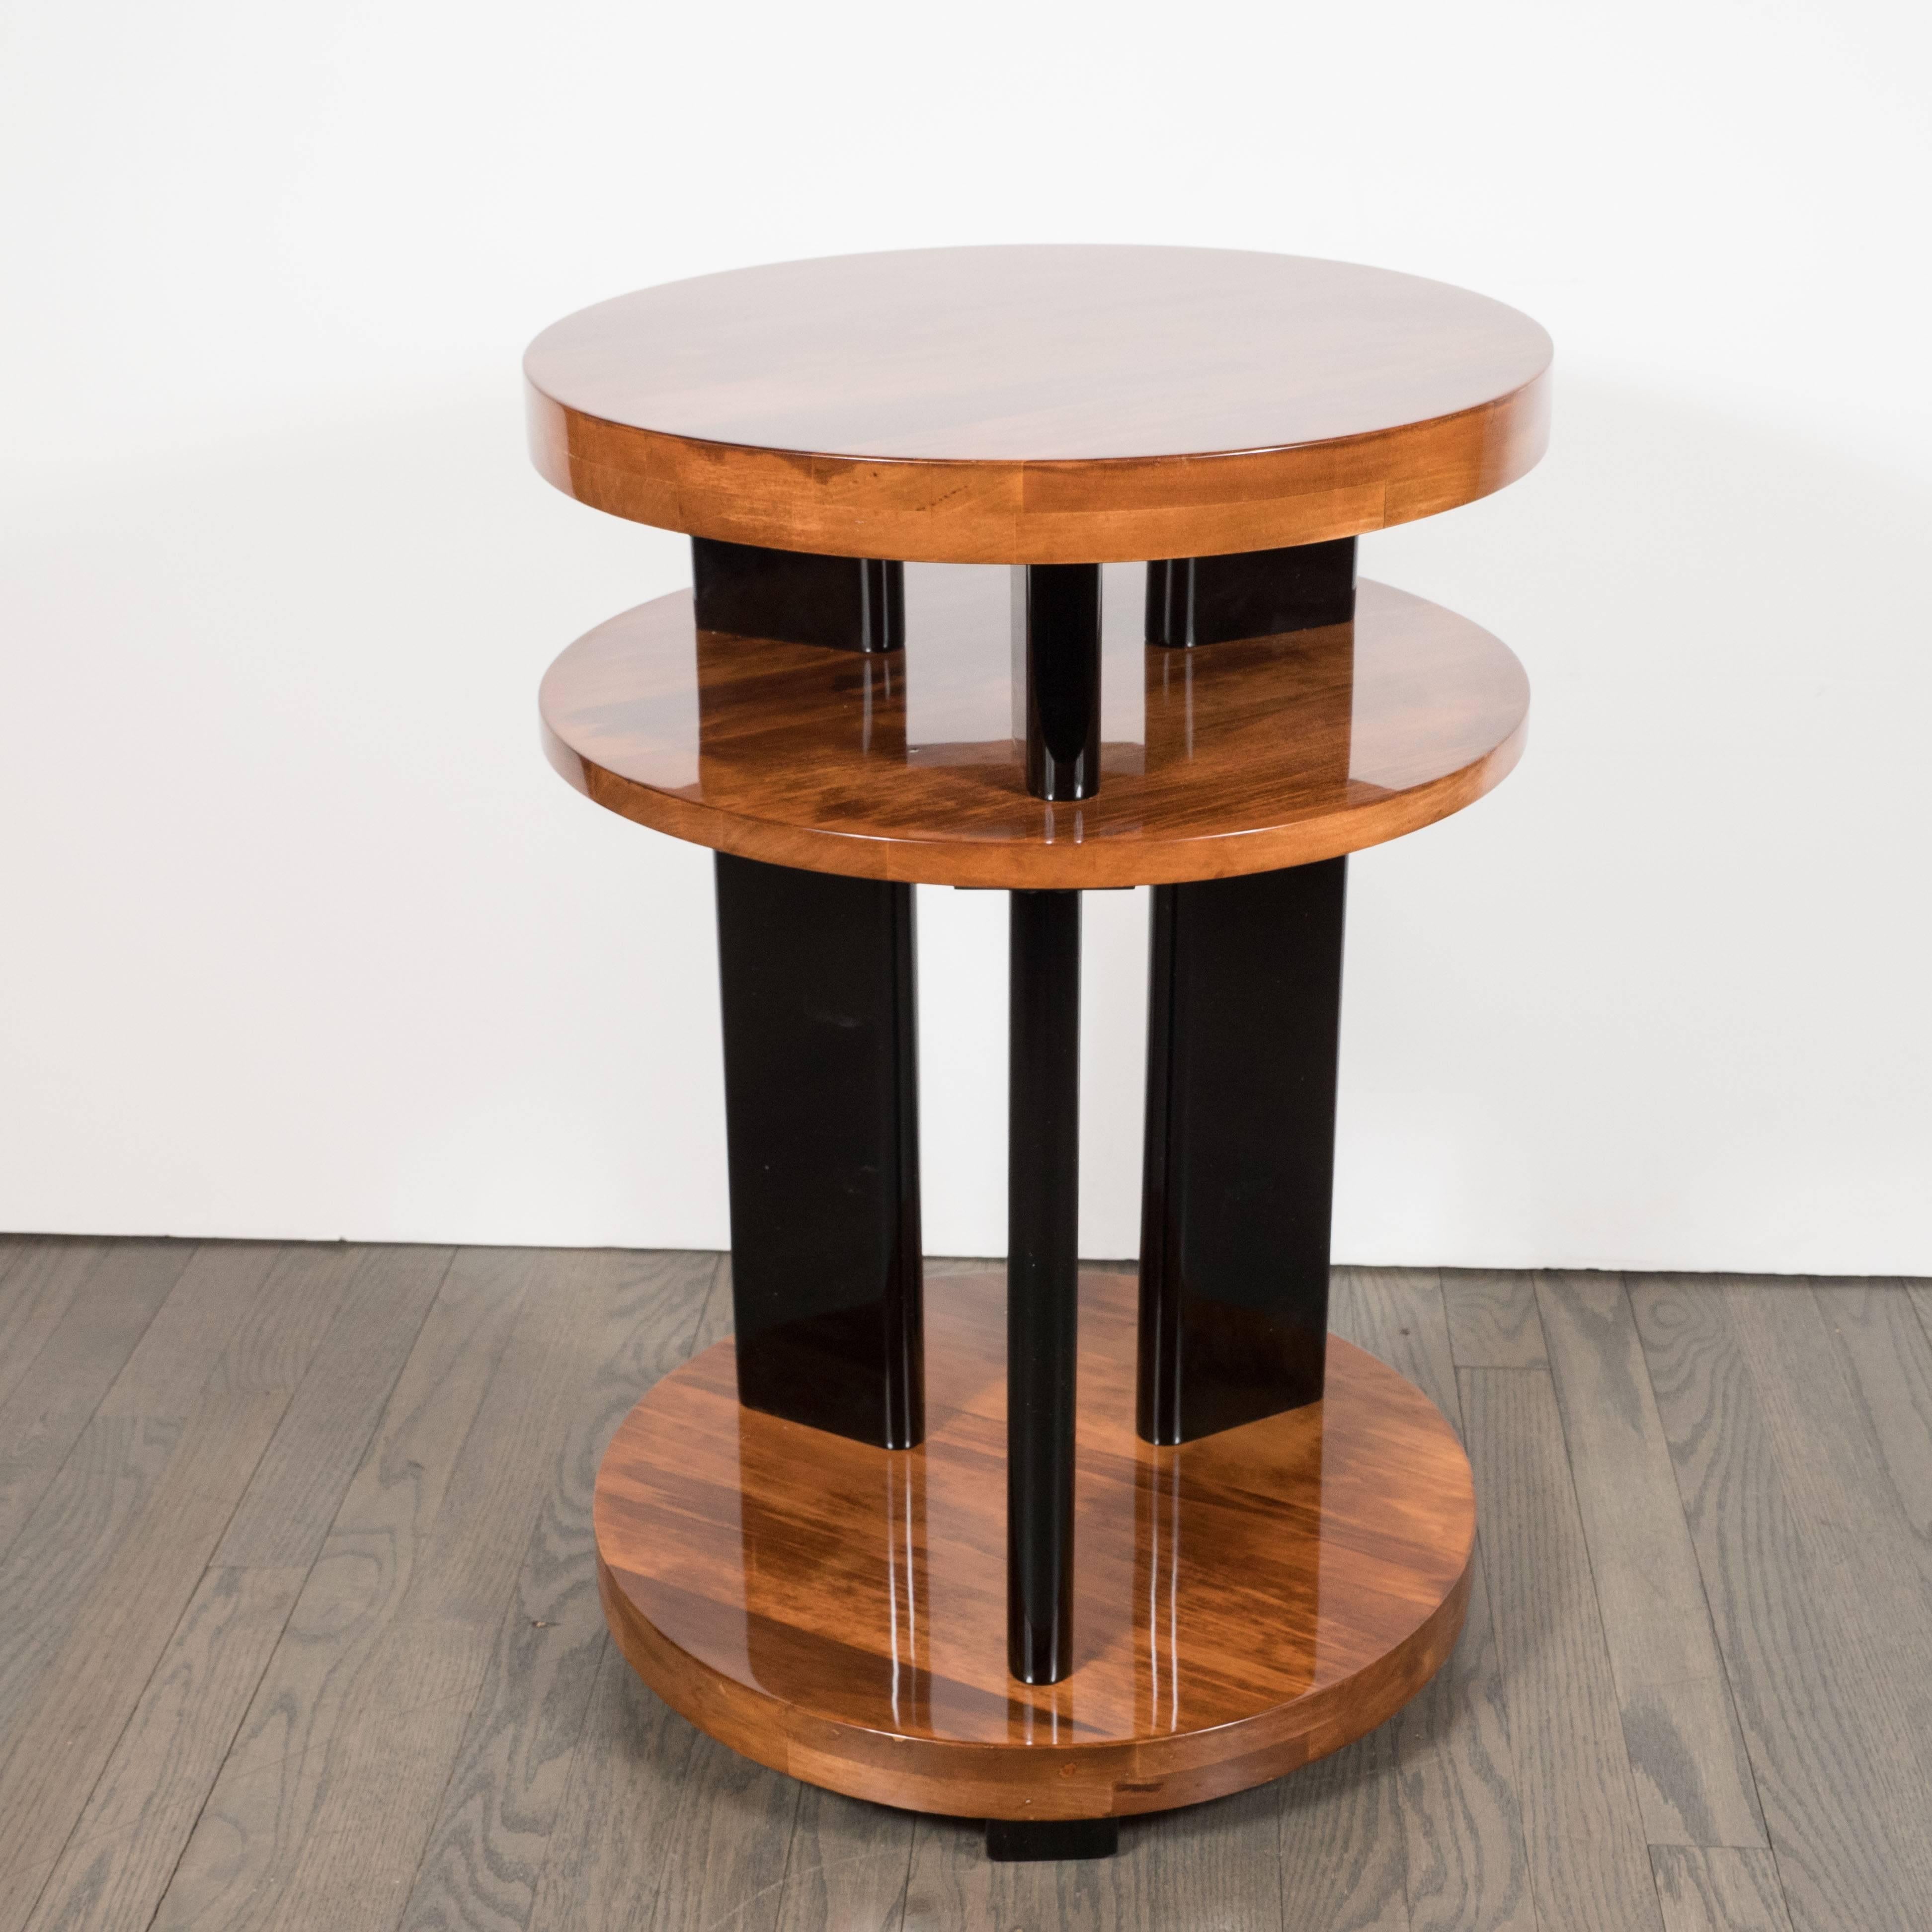 American Art Deco Three-Tiered Black Lacquer and Bookmatched Walnut Occasional Table